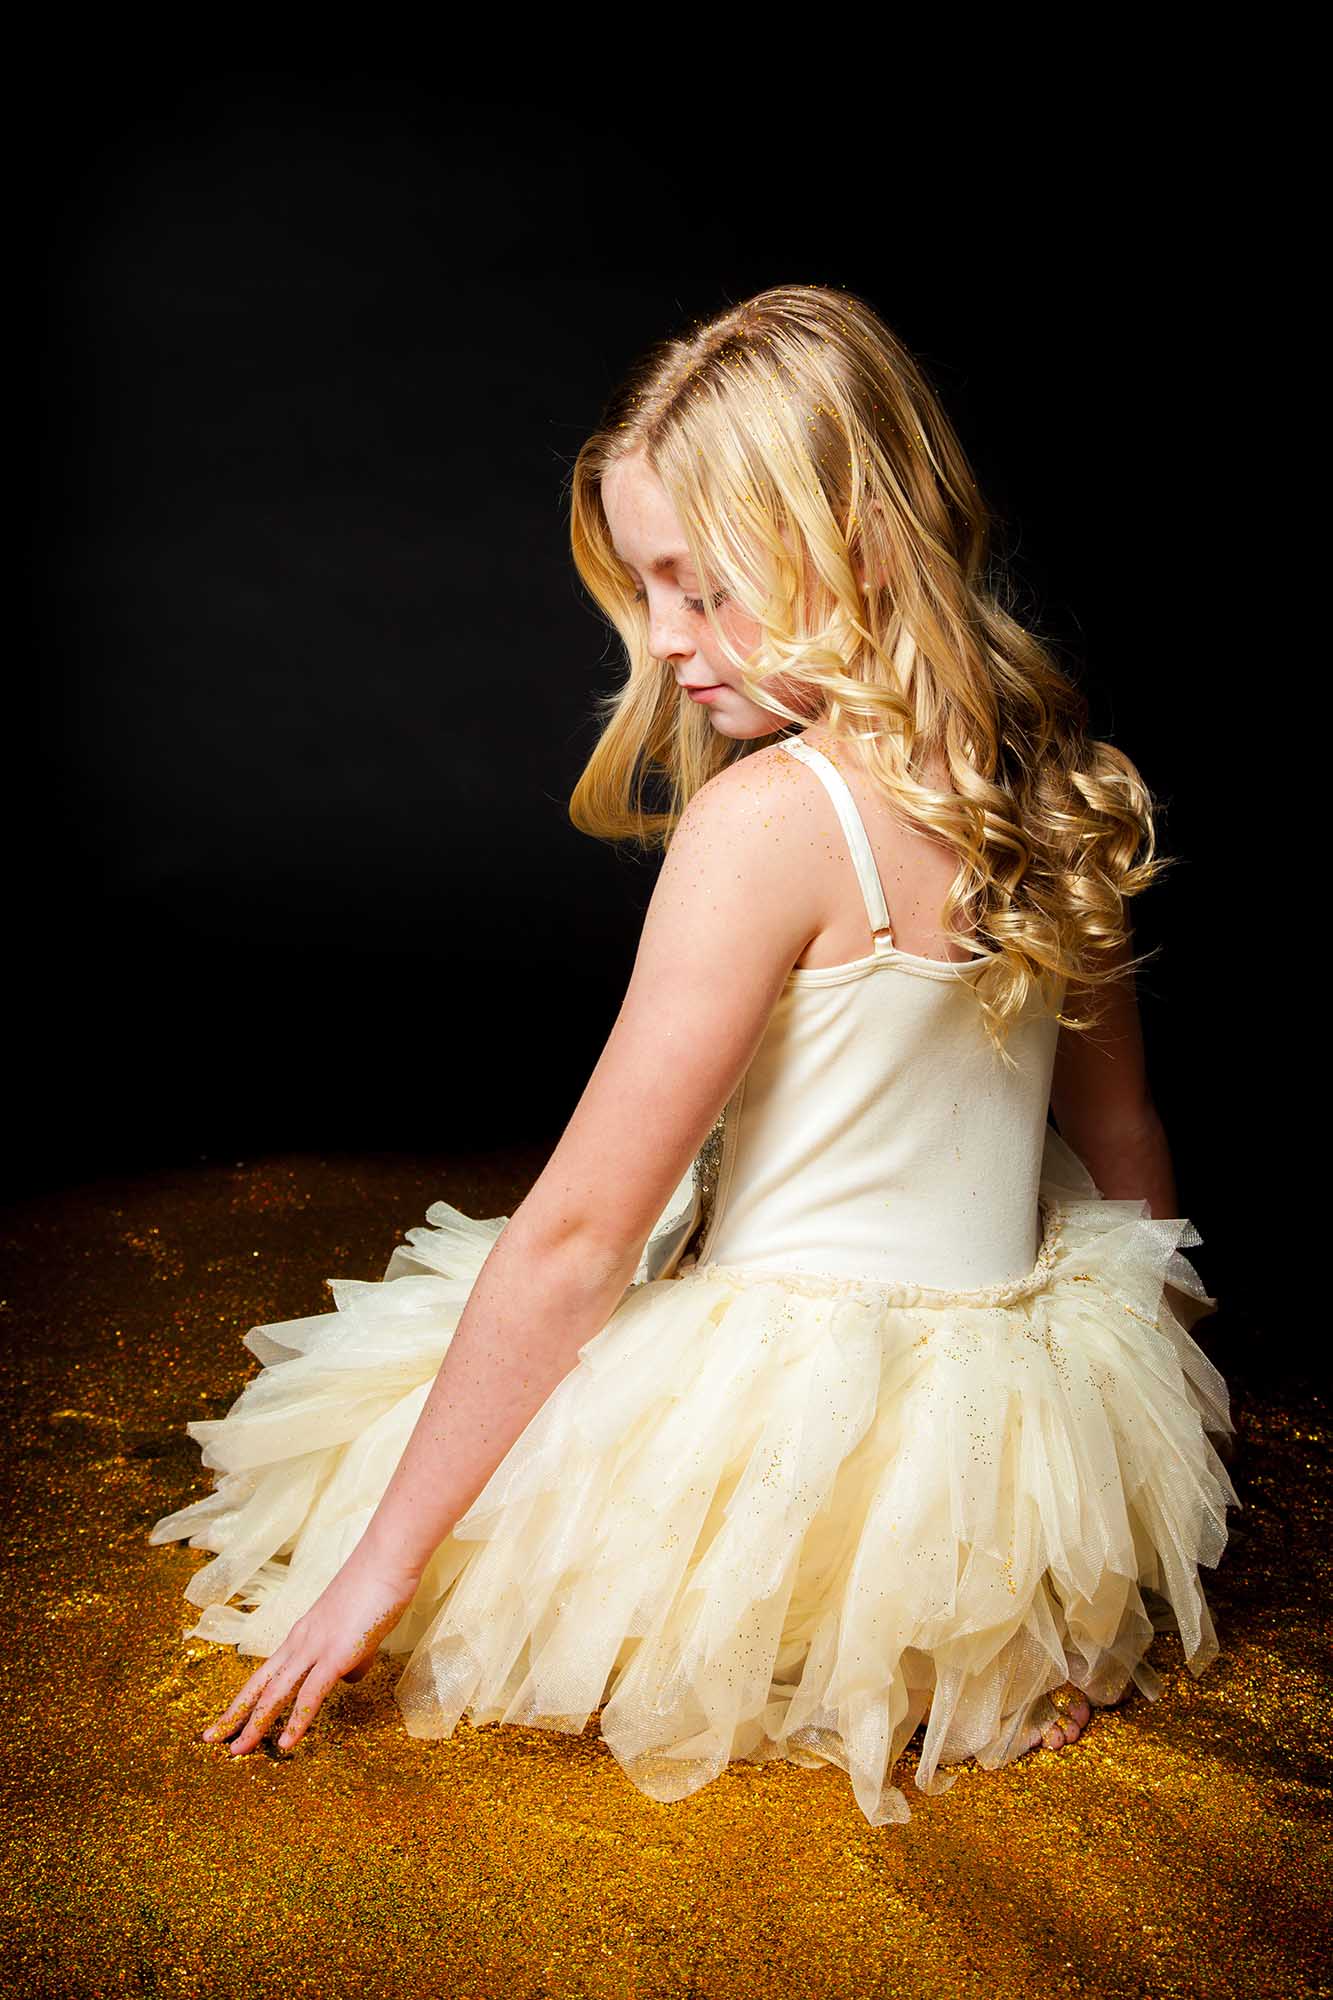 Glitter Session | Fine Art Child photographer in Sussex, Surrey, East Grinstead & Crawley 02